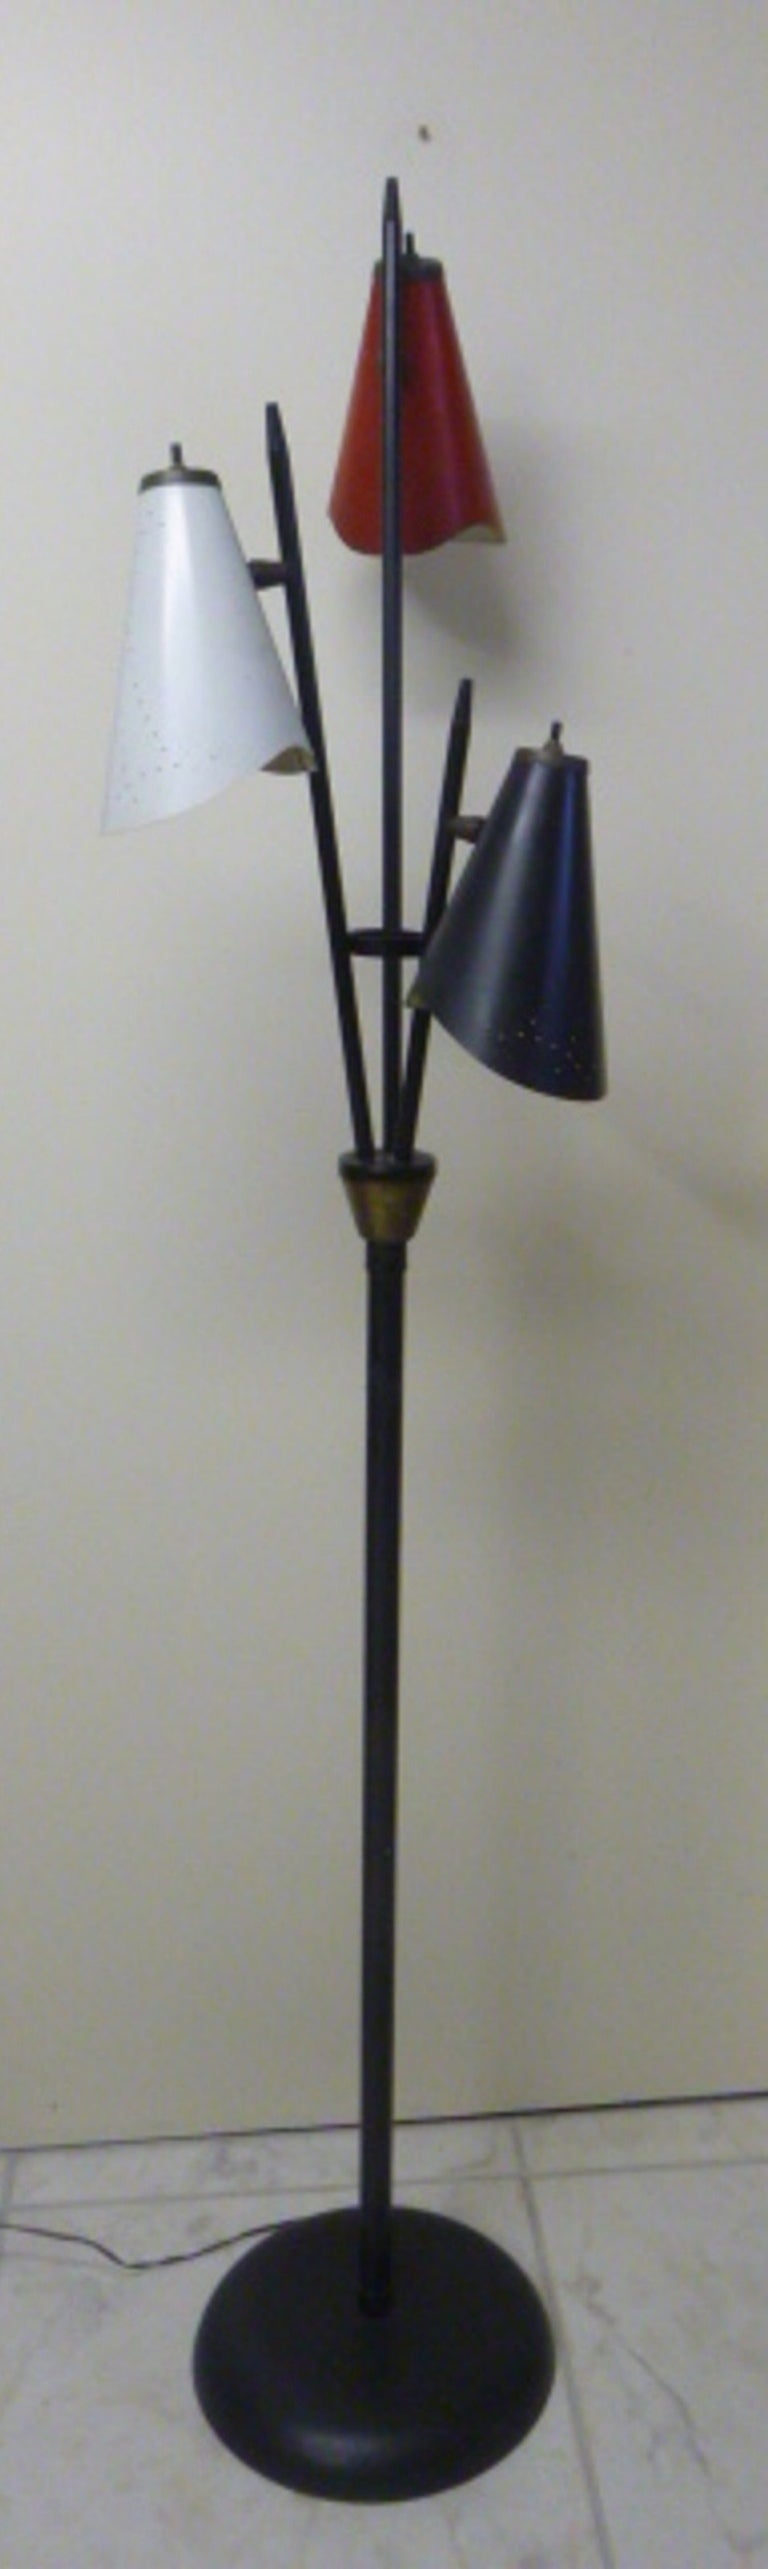 Triennale style floor lamp by Gerald Thurston for Lightolier.  USA, circa 1950.  Features three perforated shades in red, white and black.  Black frame and base with brass detailing.

Dimensions:
62.25 inches H
15 inches W (top with shades)
11